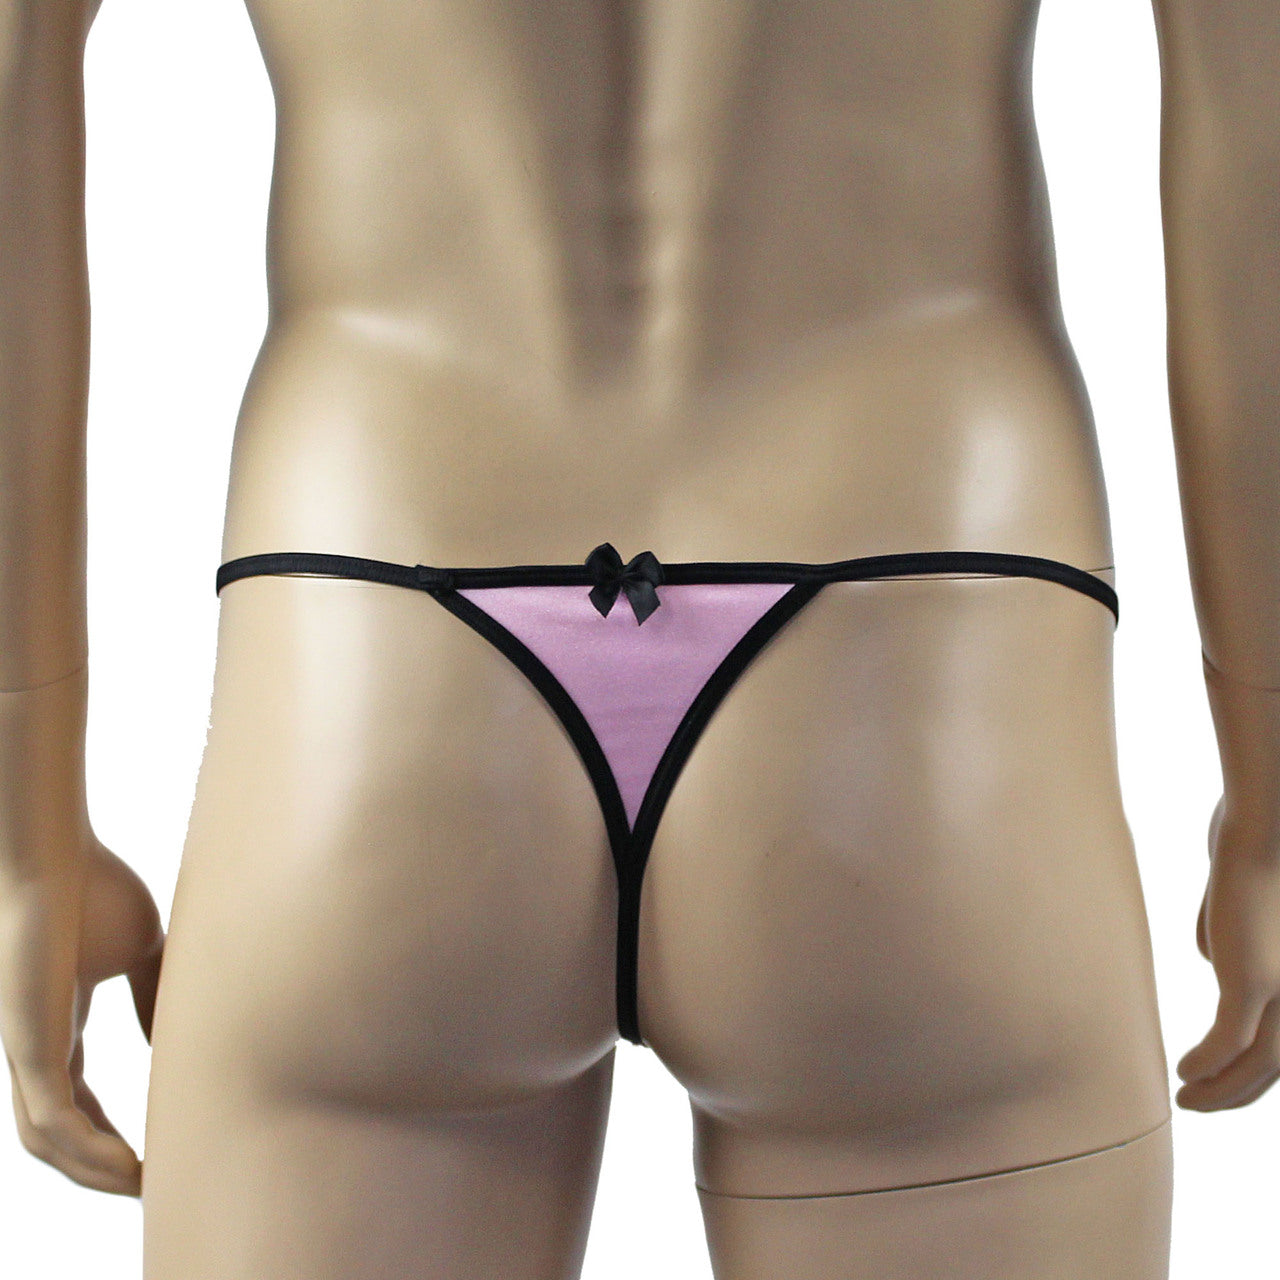 Mens Twinkle Lingerie Spandex Mini G string with Bow, Light Pink & Black